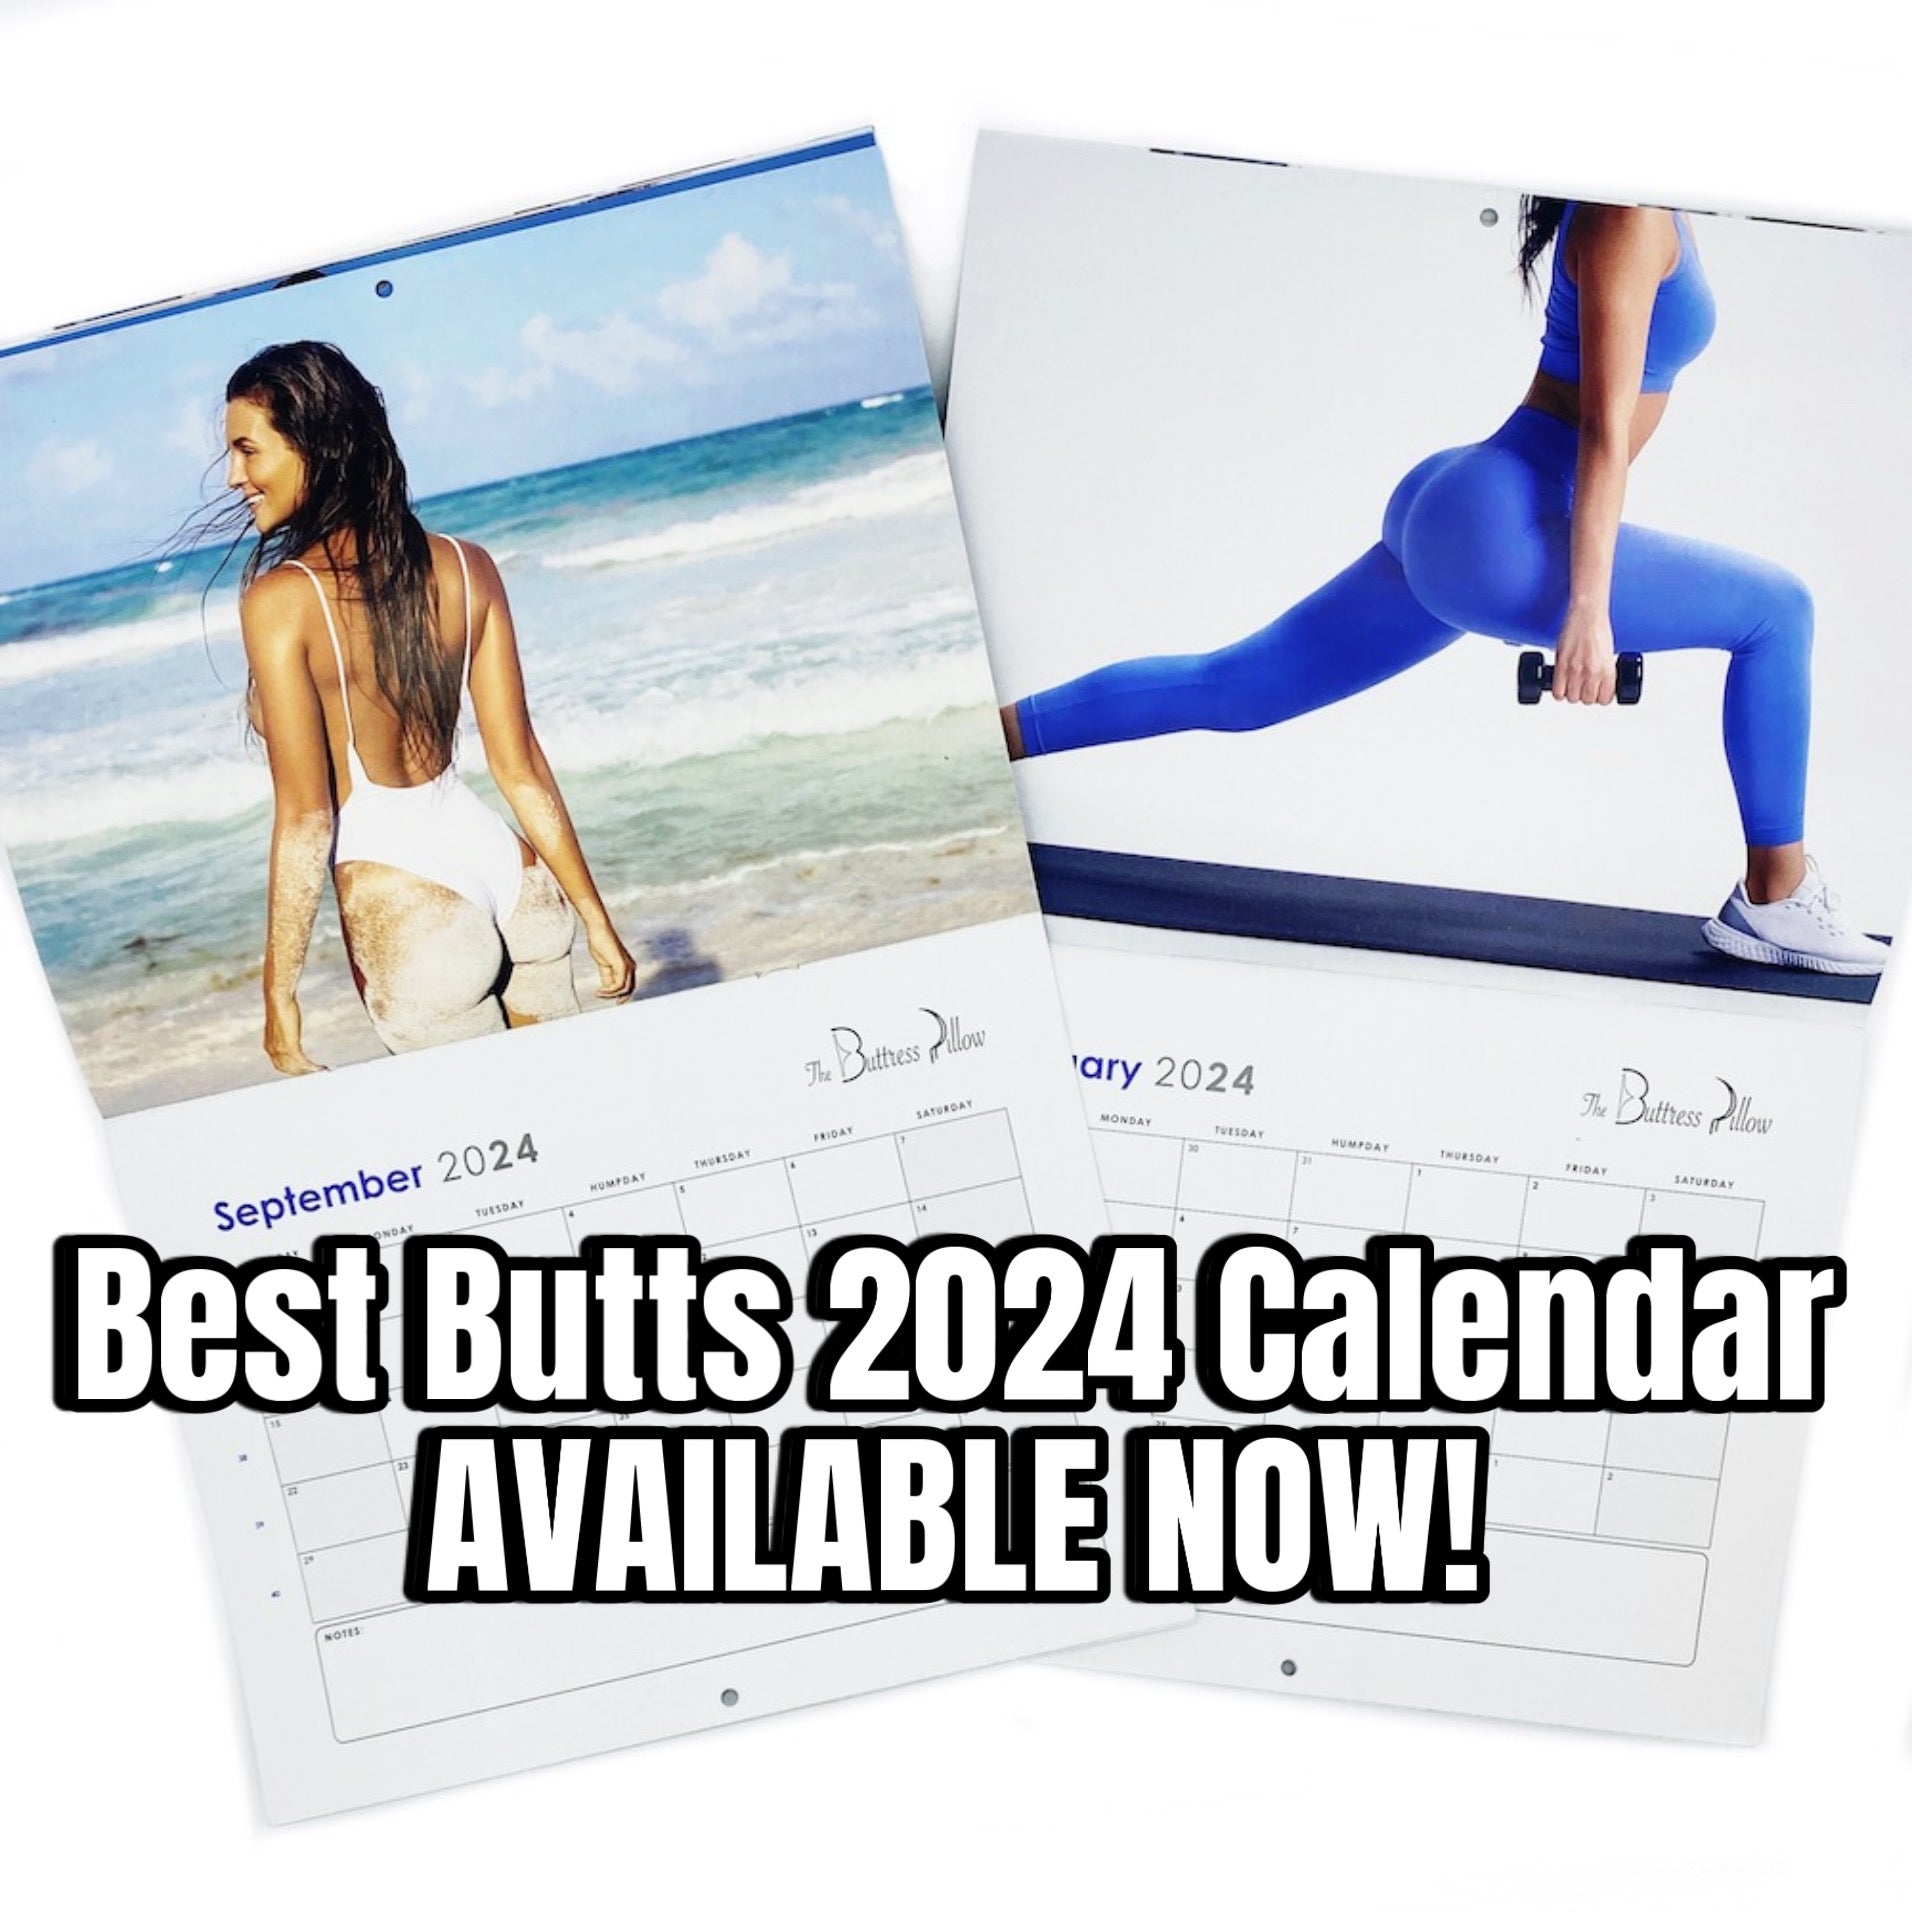 Butts to brighten your days, months and year!